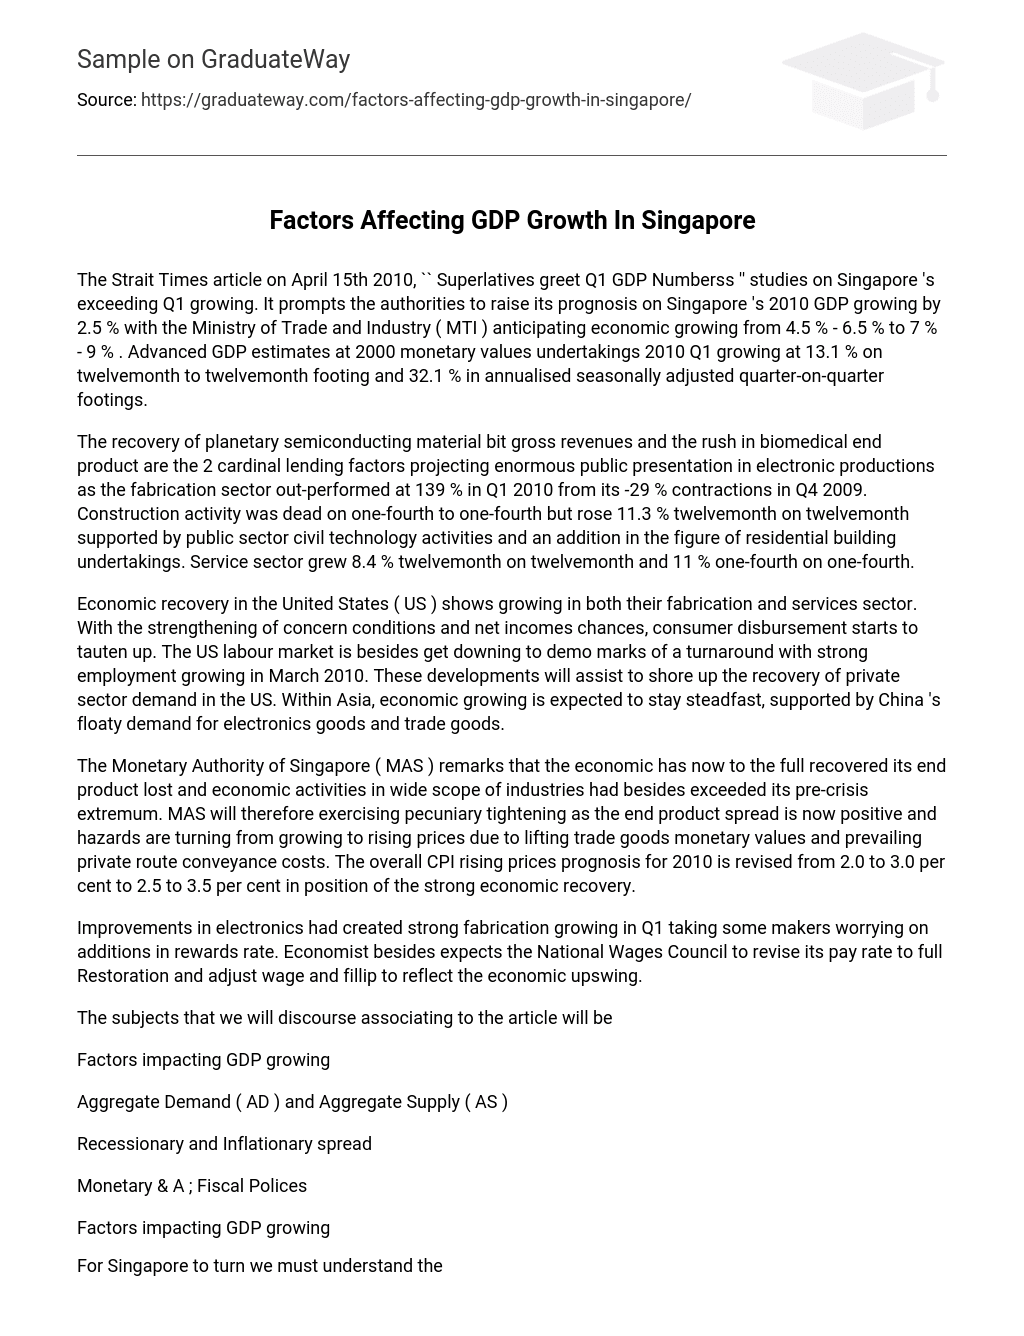 Factors Affecting GDP Growth In Singapore